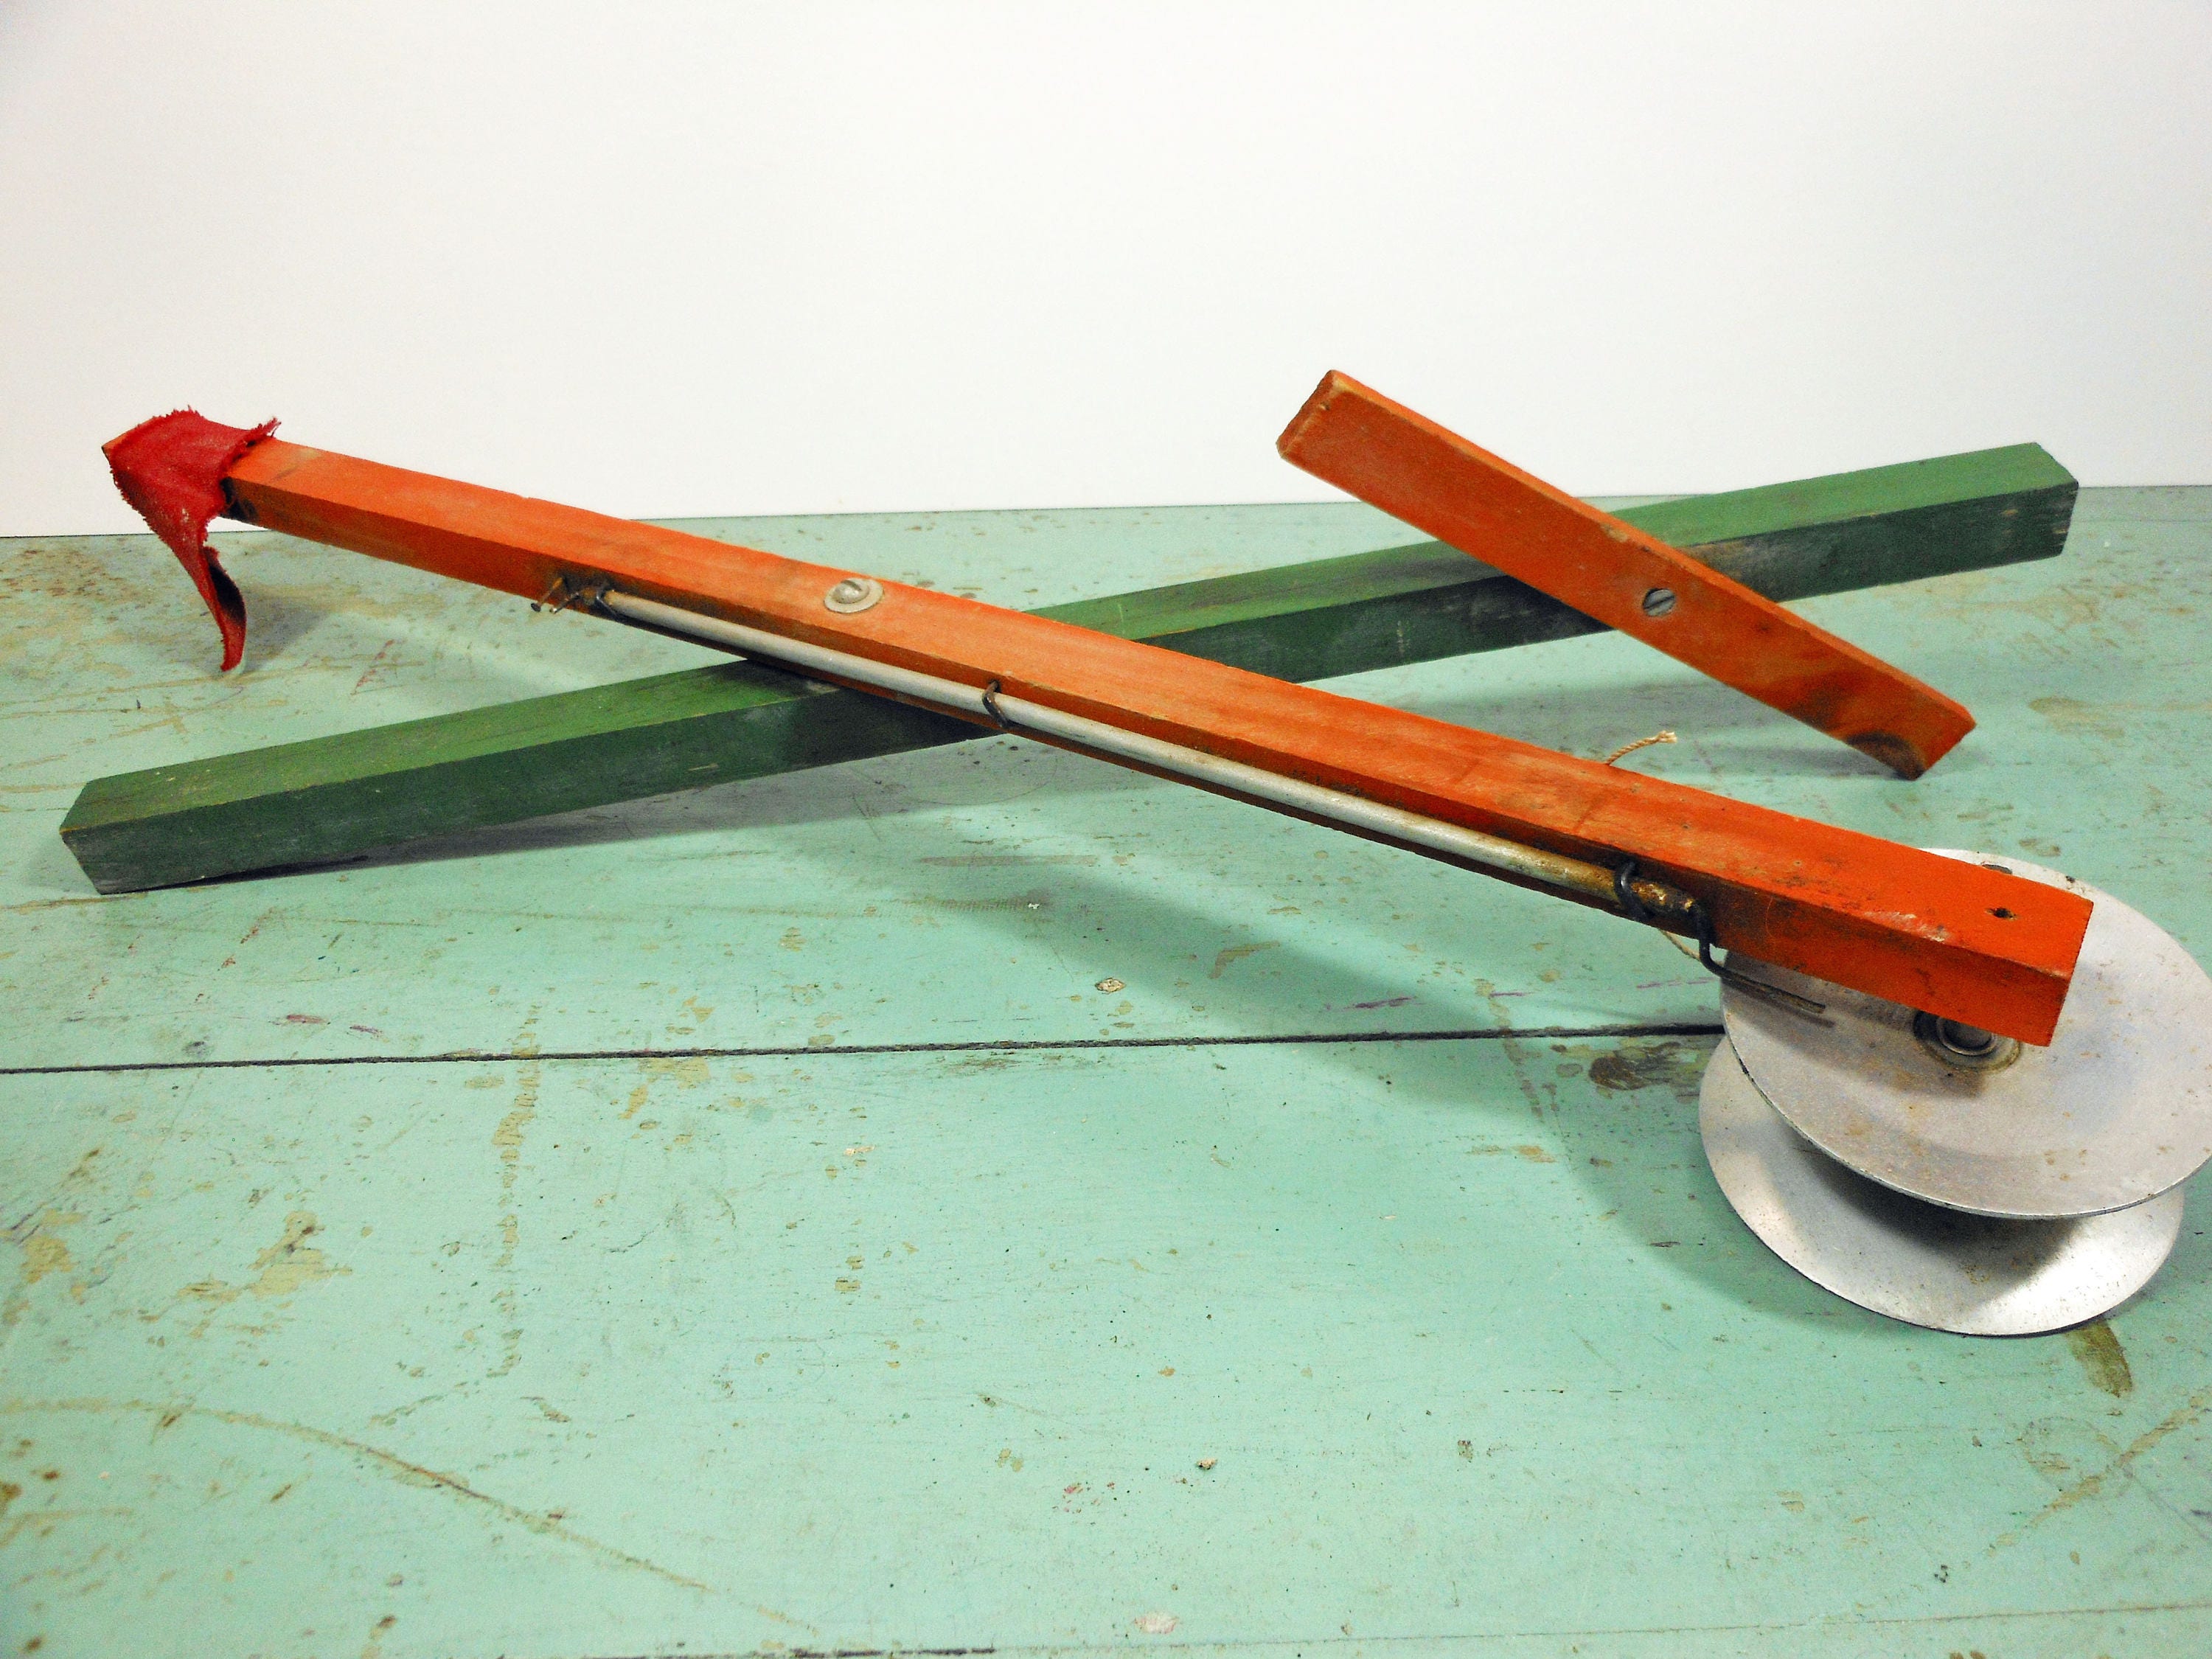 Vintage Ice Fishing Tip up With Reel and Flag, Orange and Green Fishing  Tackle -  Ireland